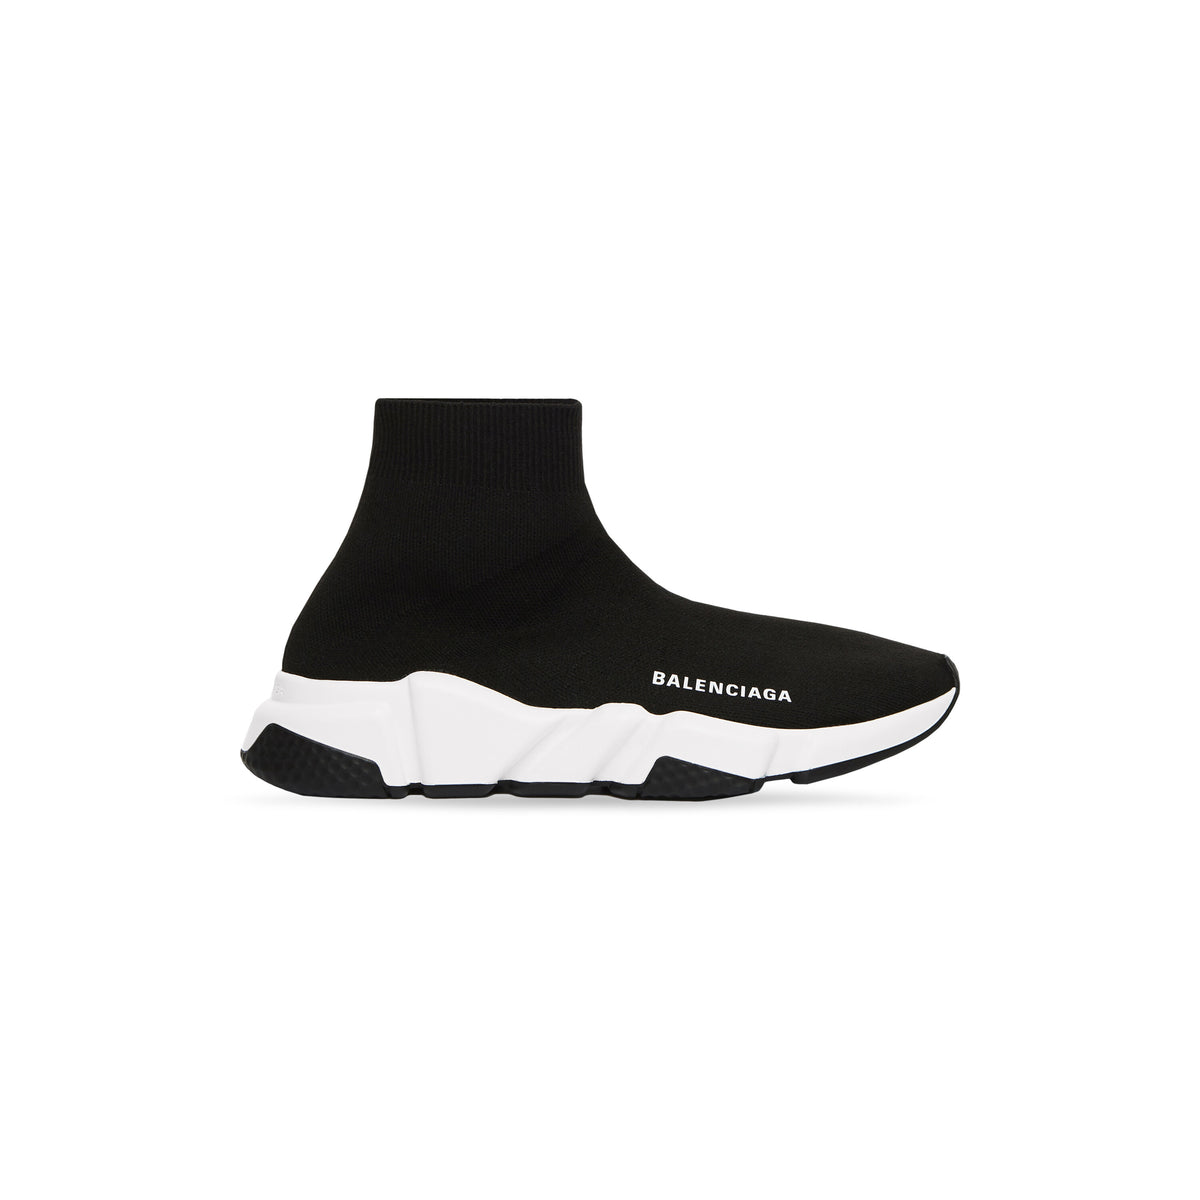 Balenciaga Womens Speed Recycled Knit Trainers In Black/White